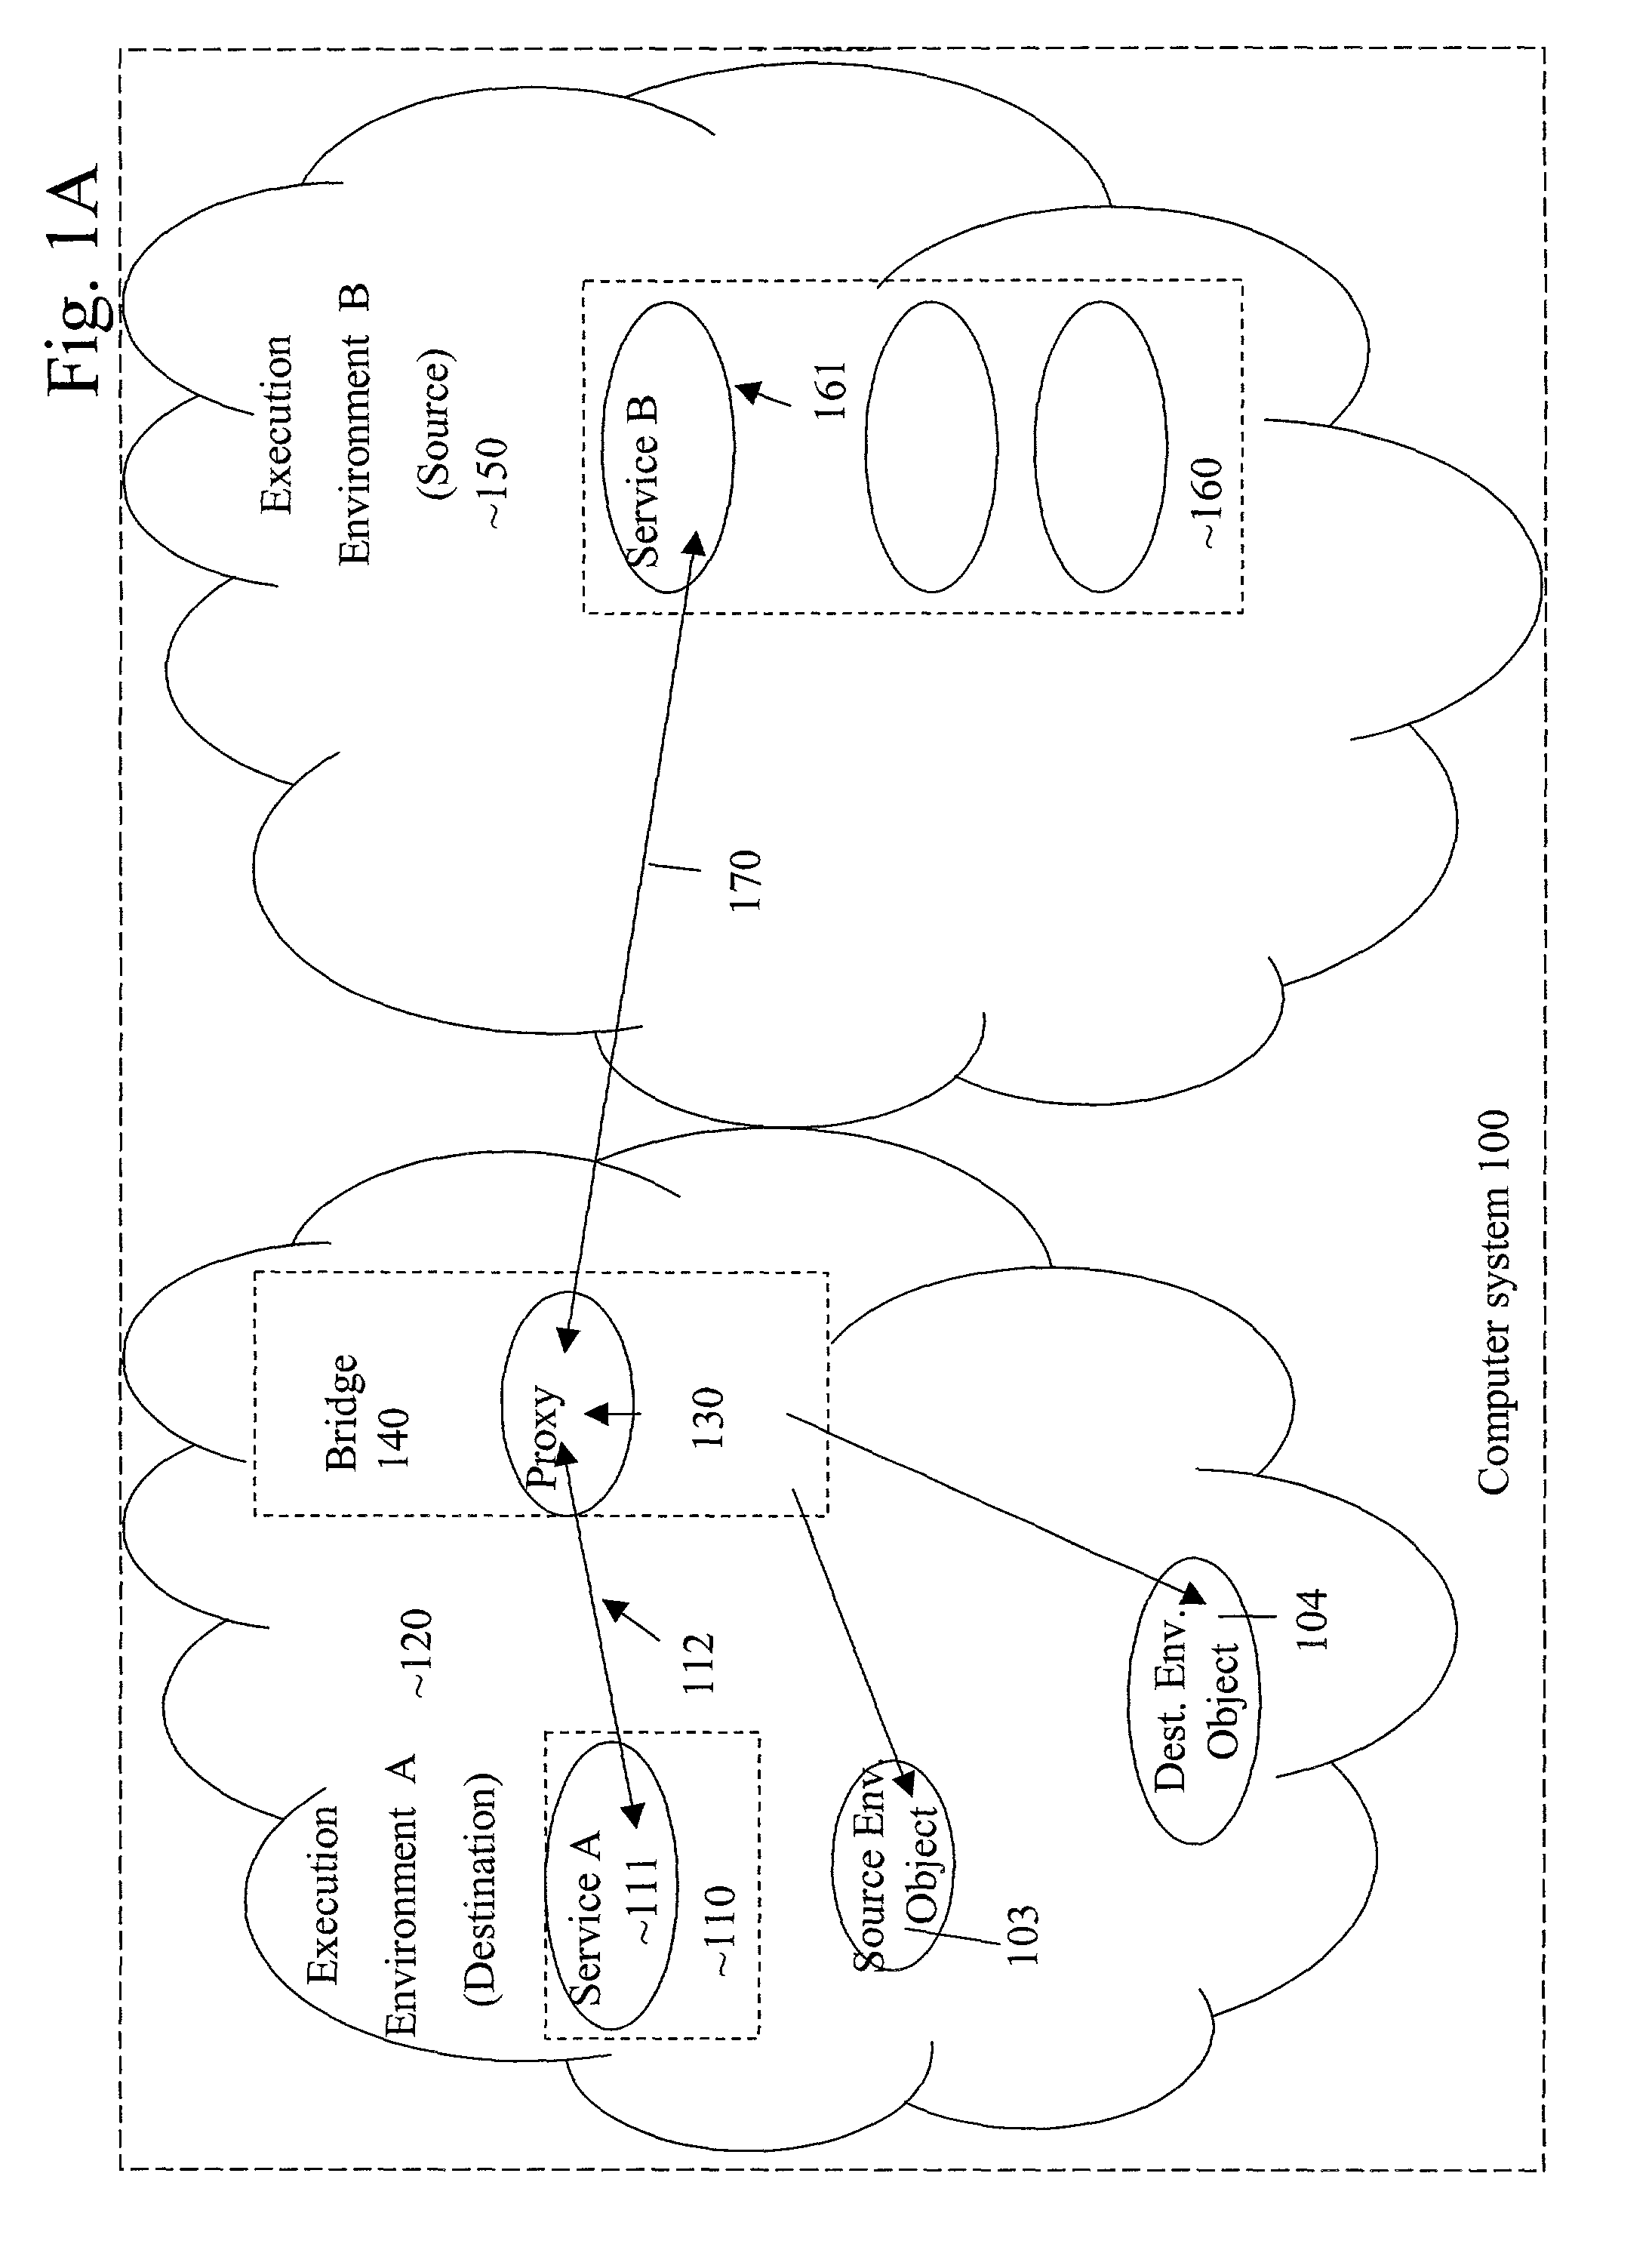 Method and system for dynamically dispatching function calls from a first execution environment to a second execution environment